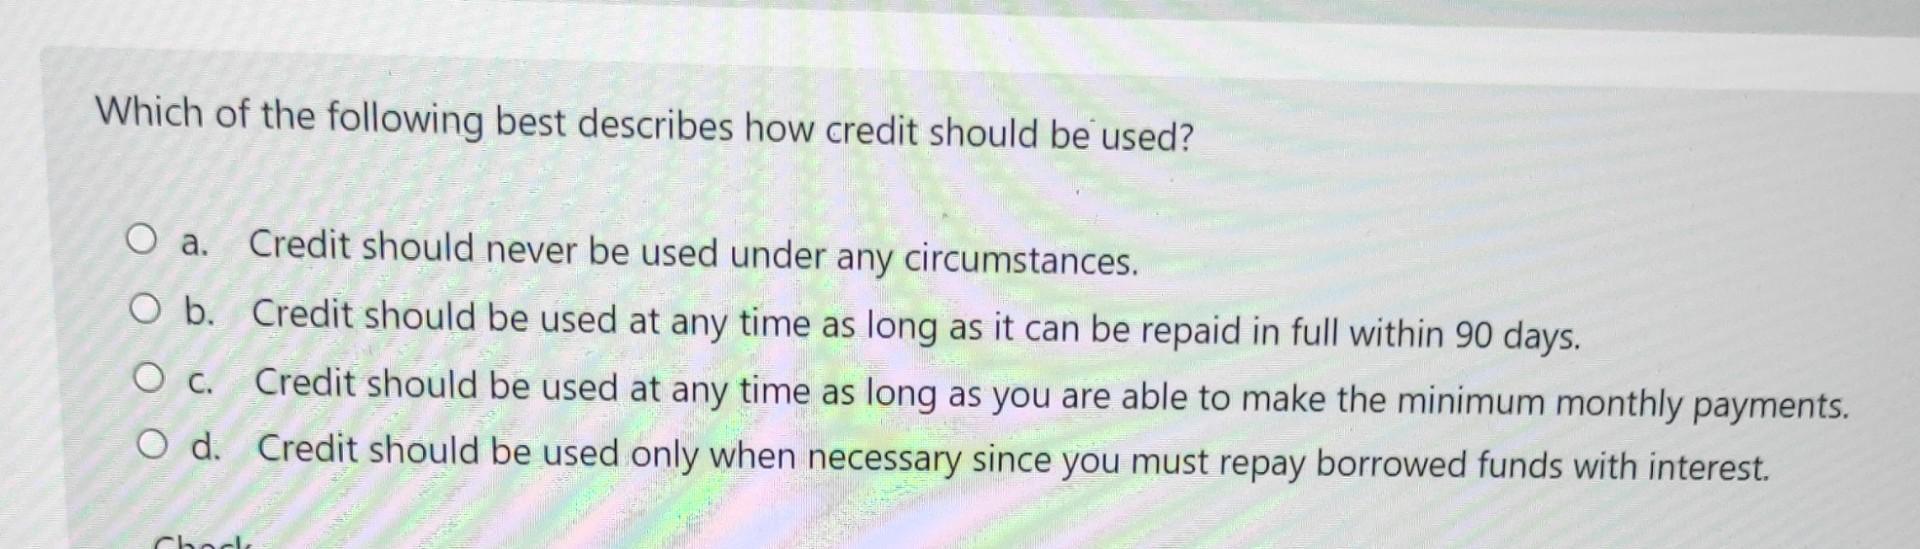 Which of the following best describes how credit should be used? O a. Credit should never be used under any circumstances. O